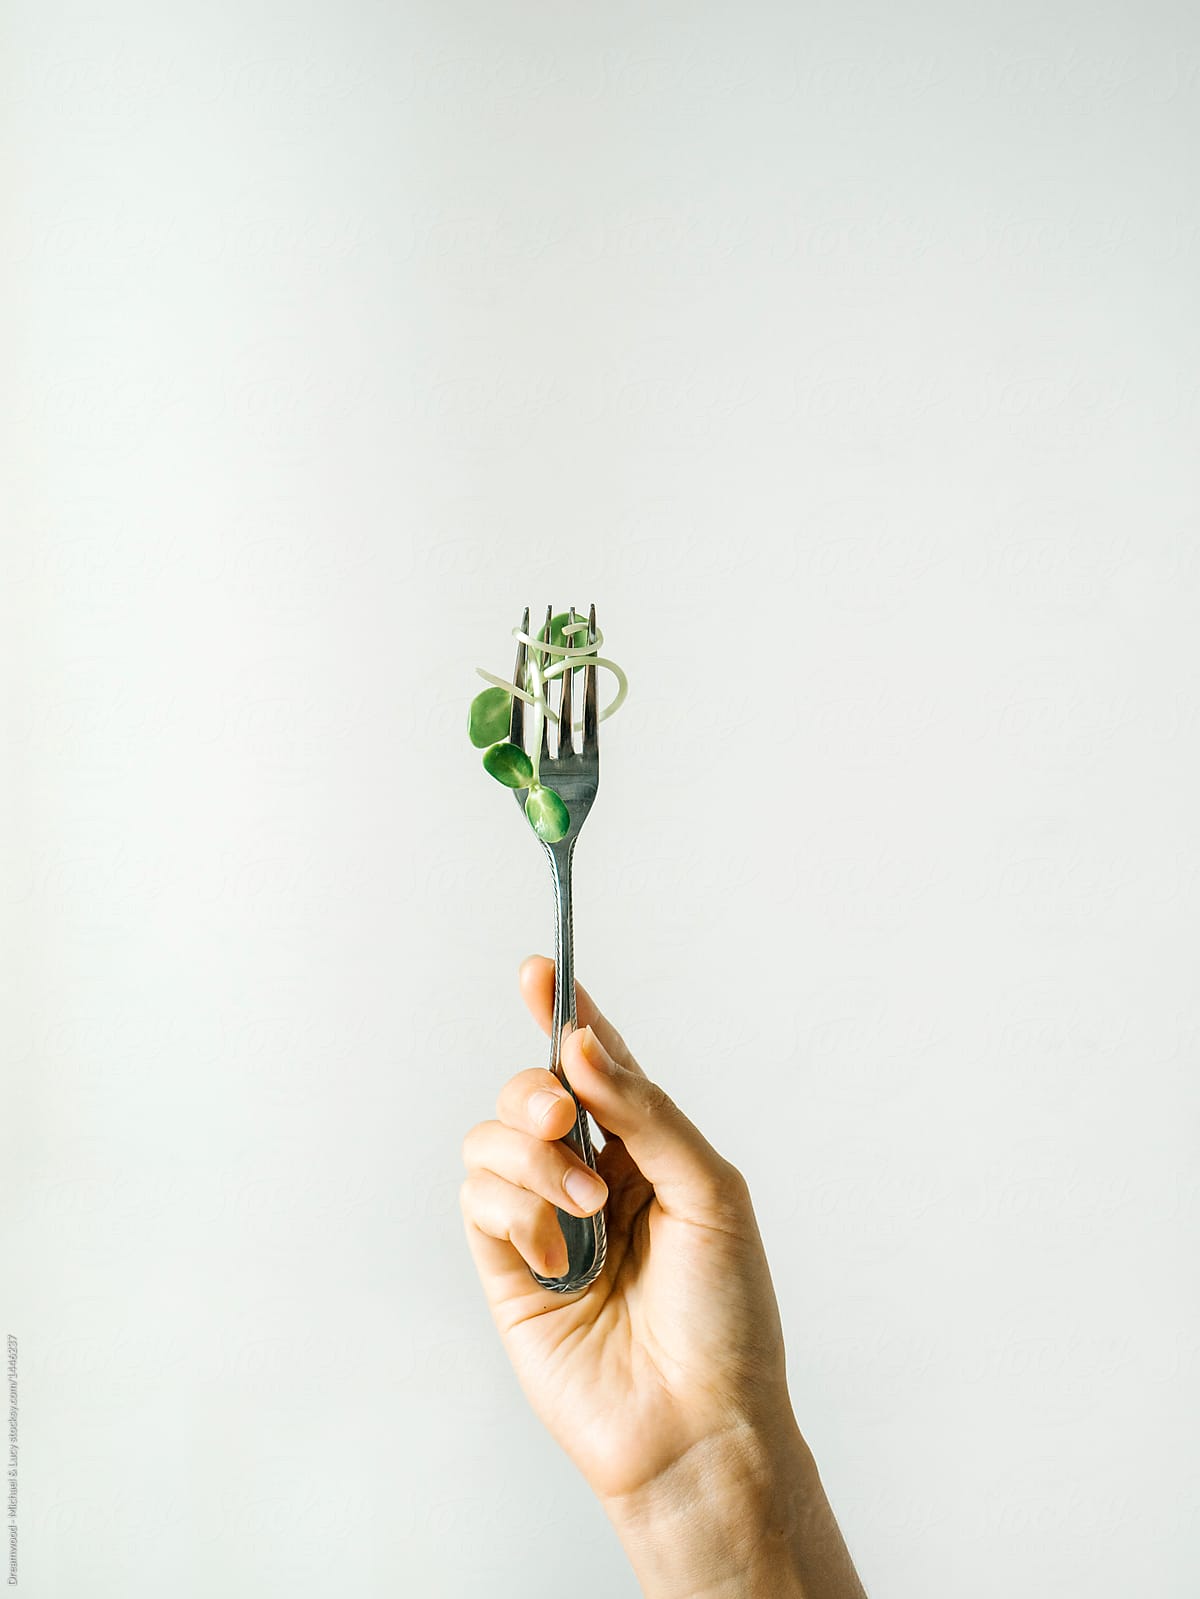 Crop hand holding fork with green